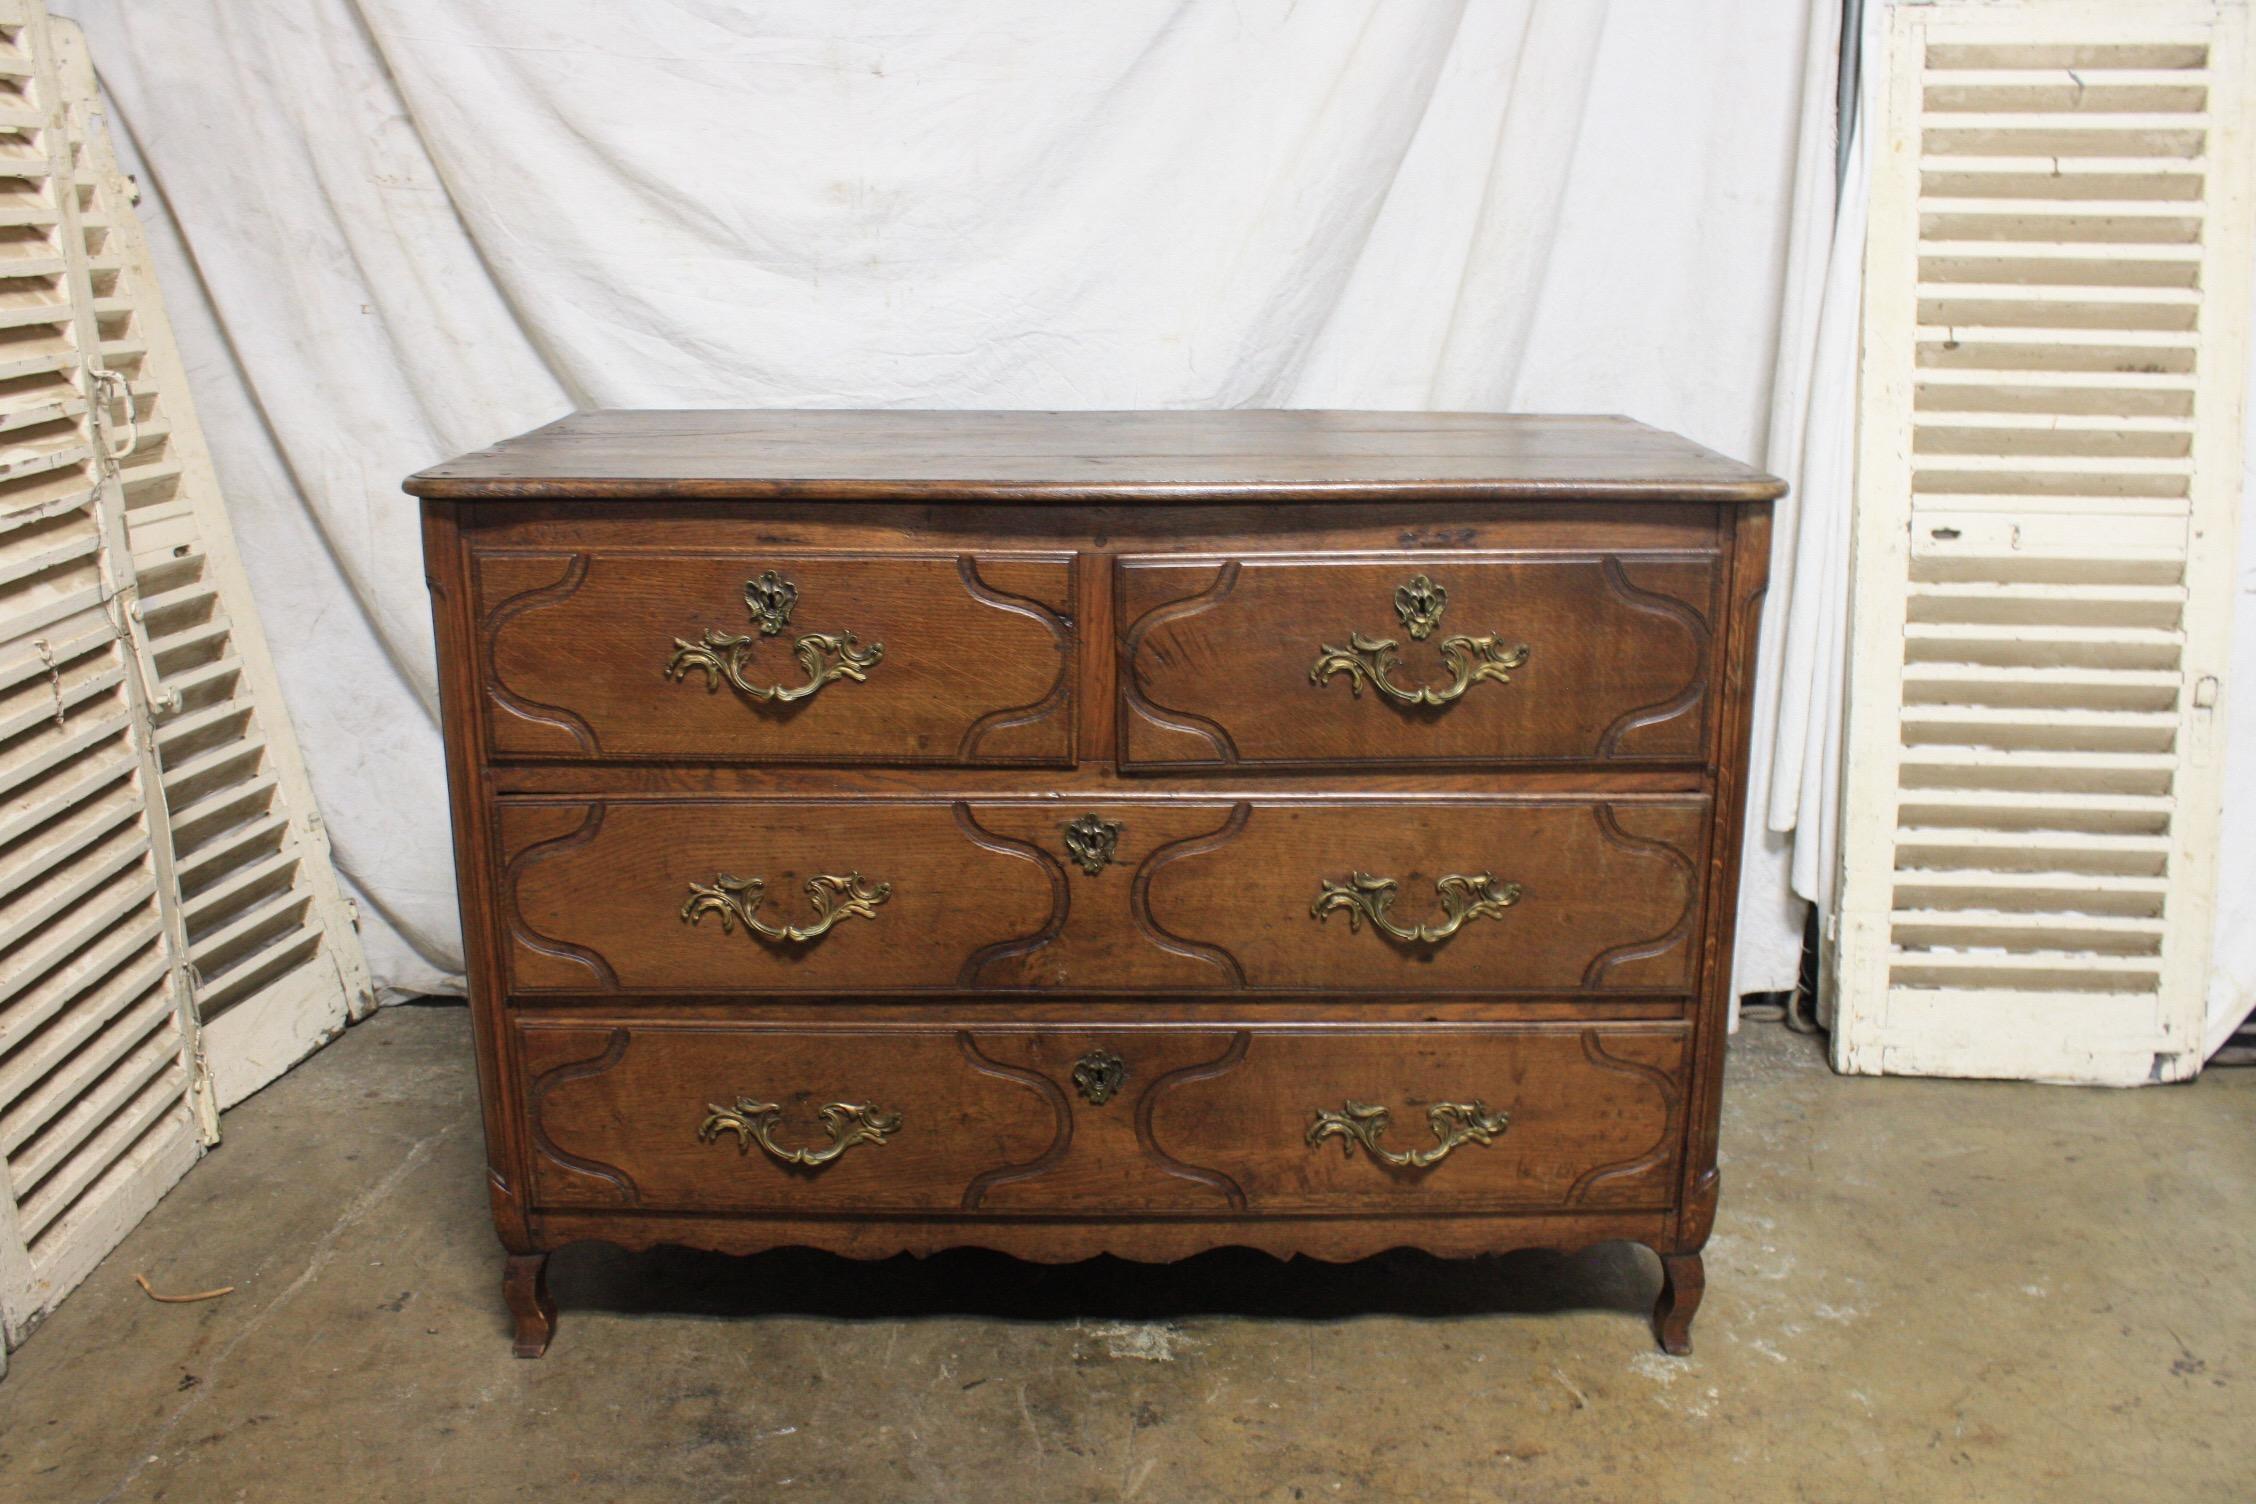 Late 18th century French commode.